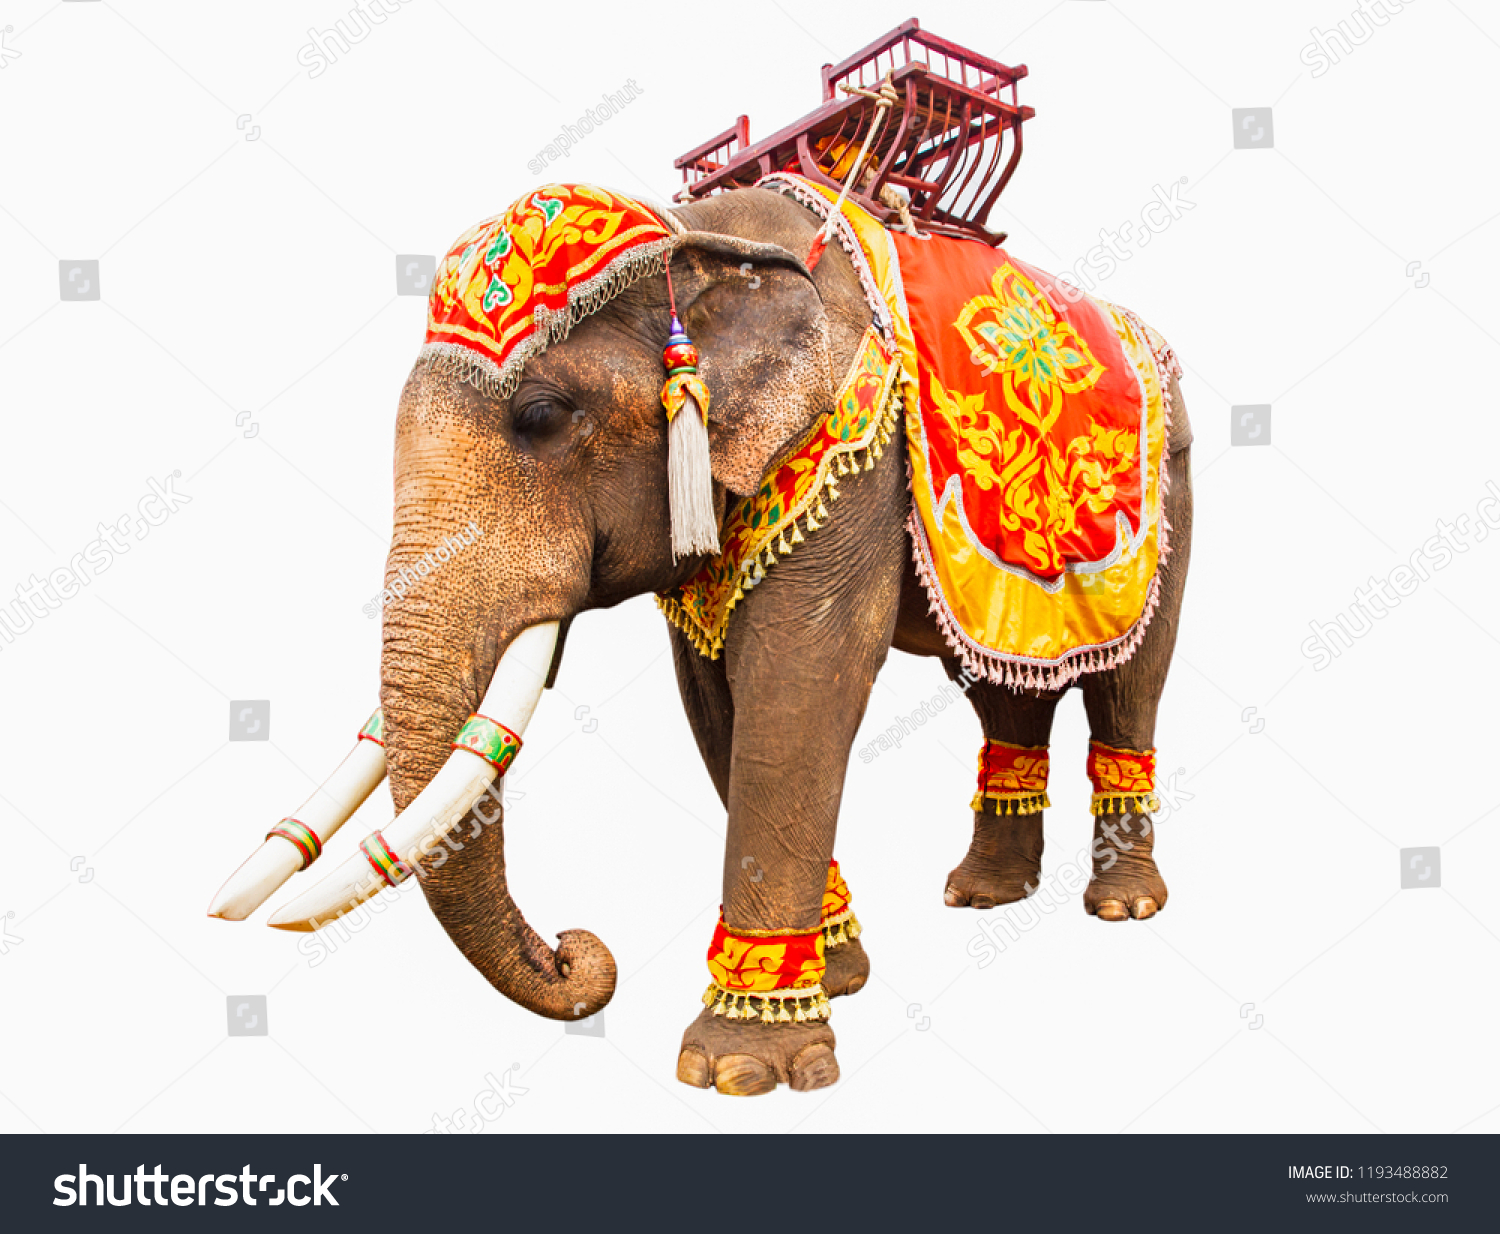 Elephant has beautiful and large isolated on white background. colorful painted elephant head ,Decorated elephants in Thailand. #1193488882